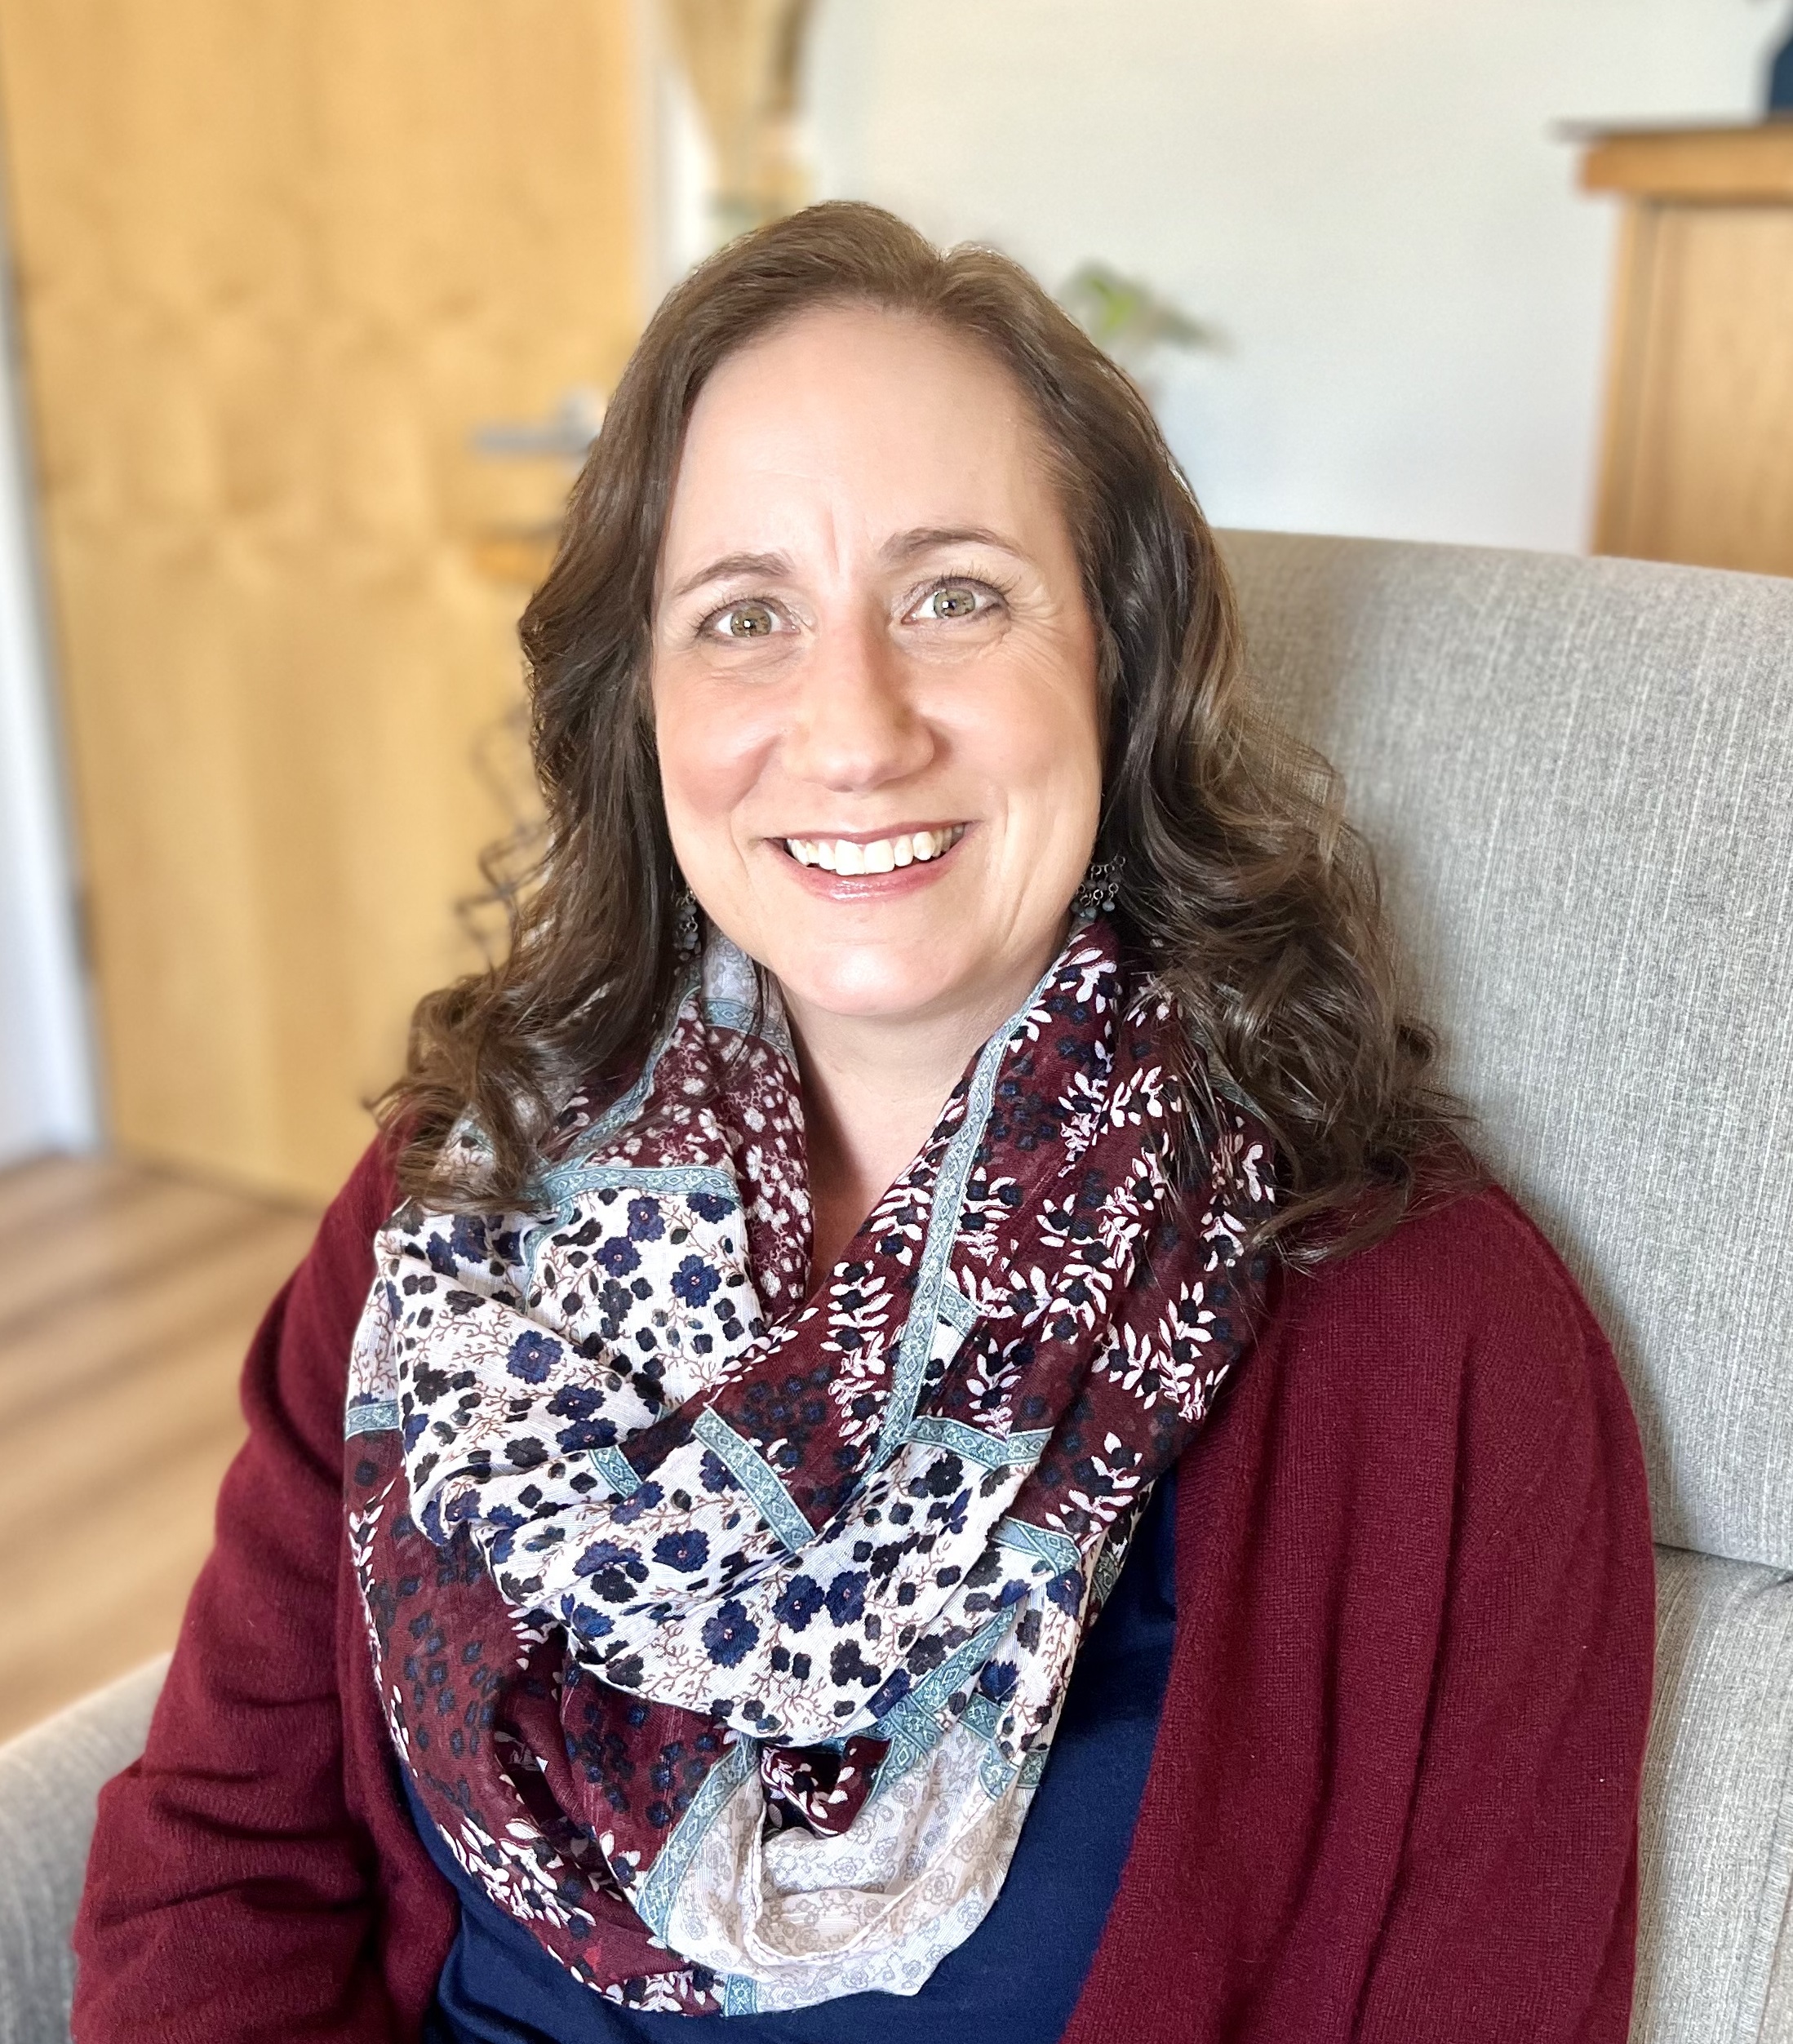 Photo of Jennifer Hajdu, Associate Marriage and Family Therapist. Jennifer is a therapist in San Luis Obispo providing psychotherapy services with DeRose Therapy Group